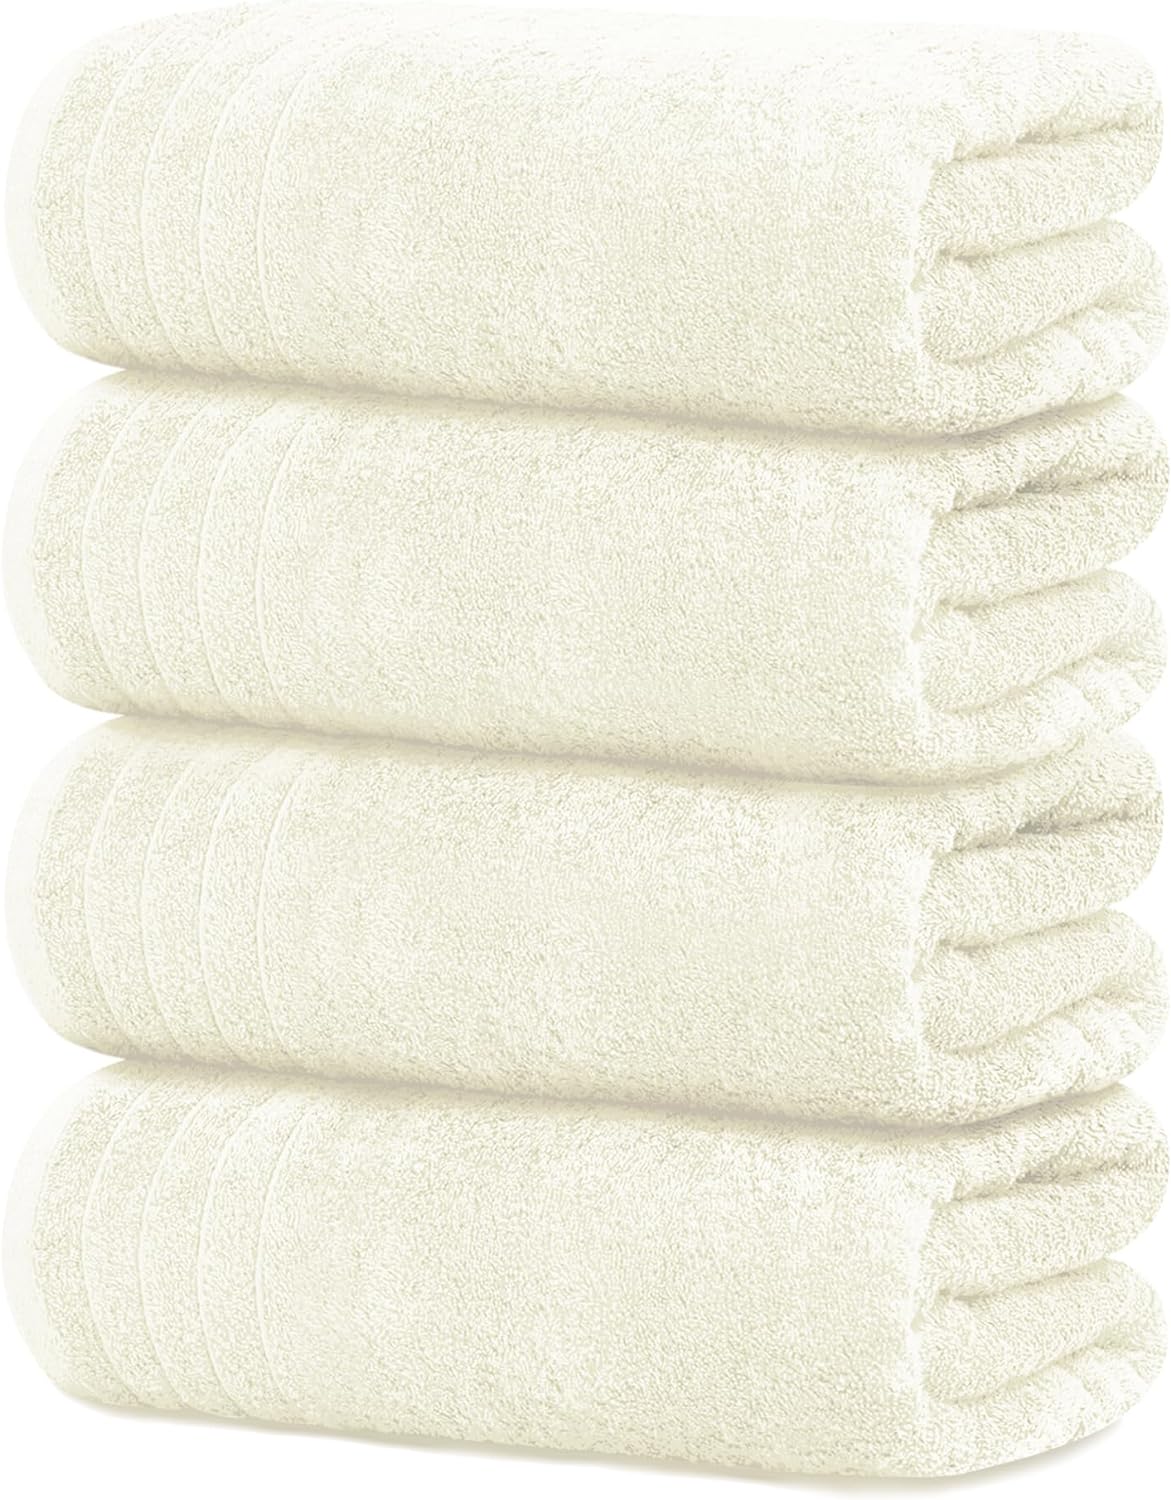 Tens Towels Large Bath Towels, 100% Cotton, 30 x 60 Inches Extra